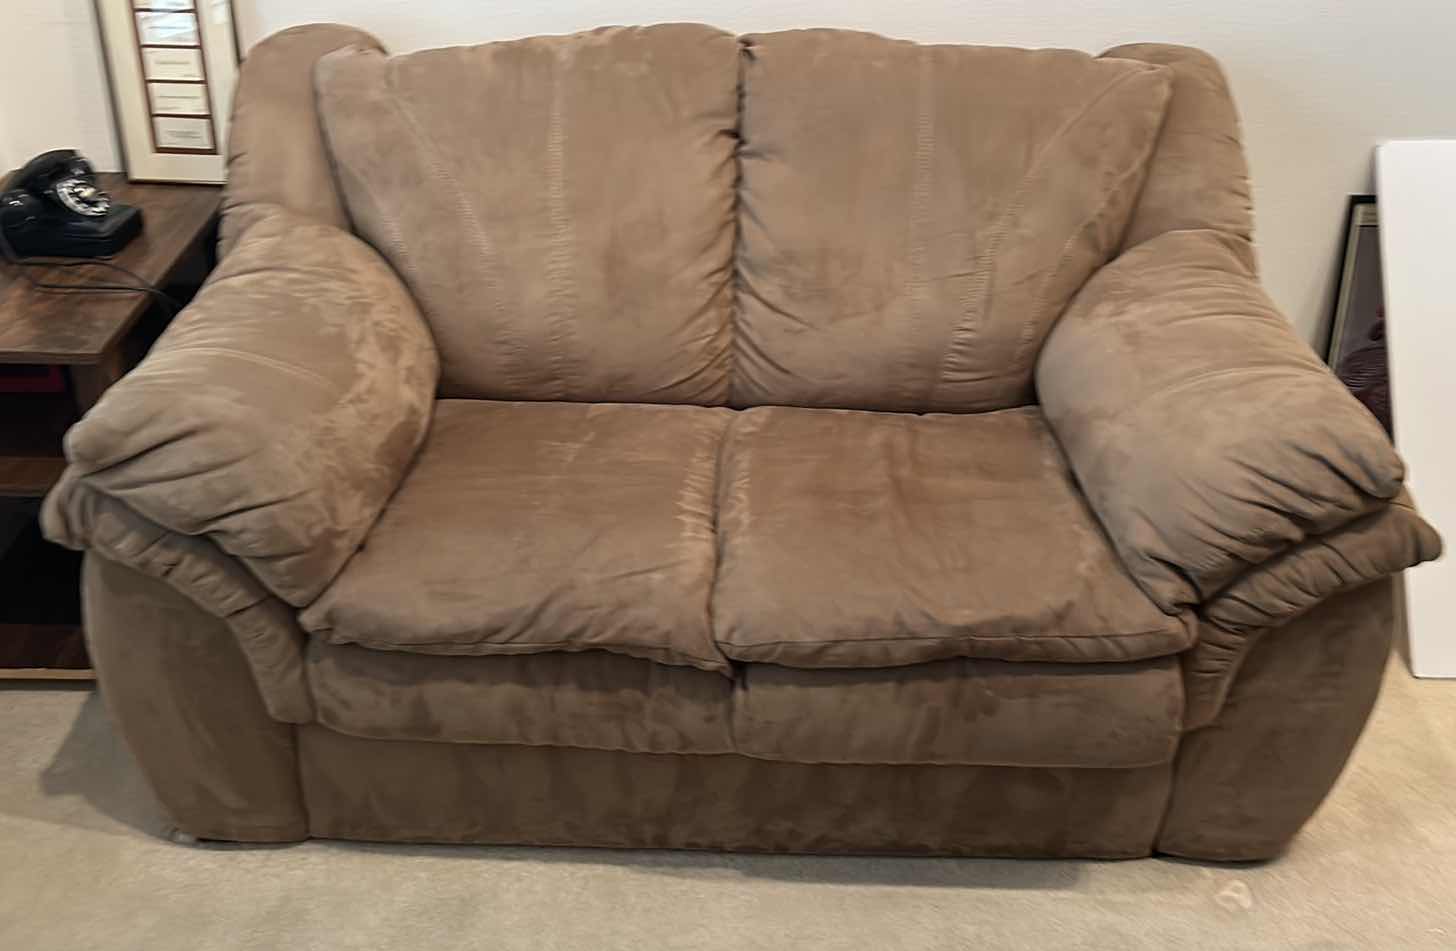 Photo 1 of SUPER SOFT DOUBLE PLUSH SUEDE FEEL SOFA/LOVESEAT, CHOCOLATE BROWN 61” x 41”